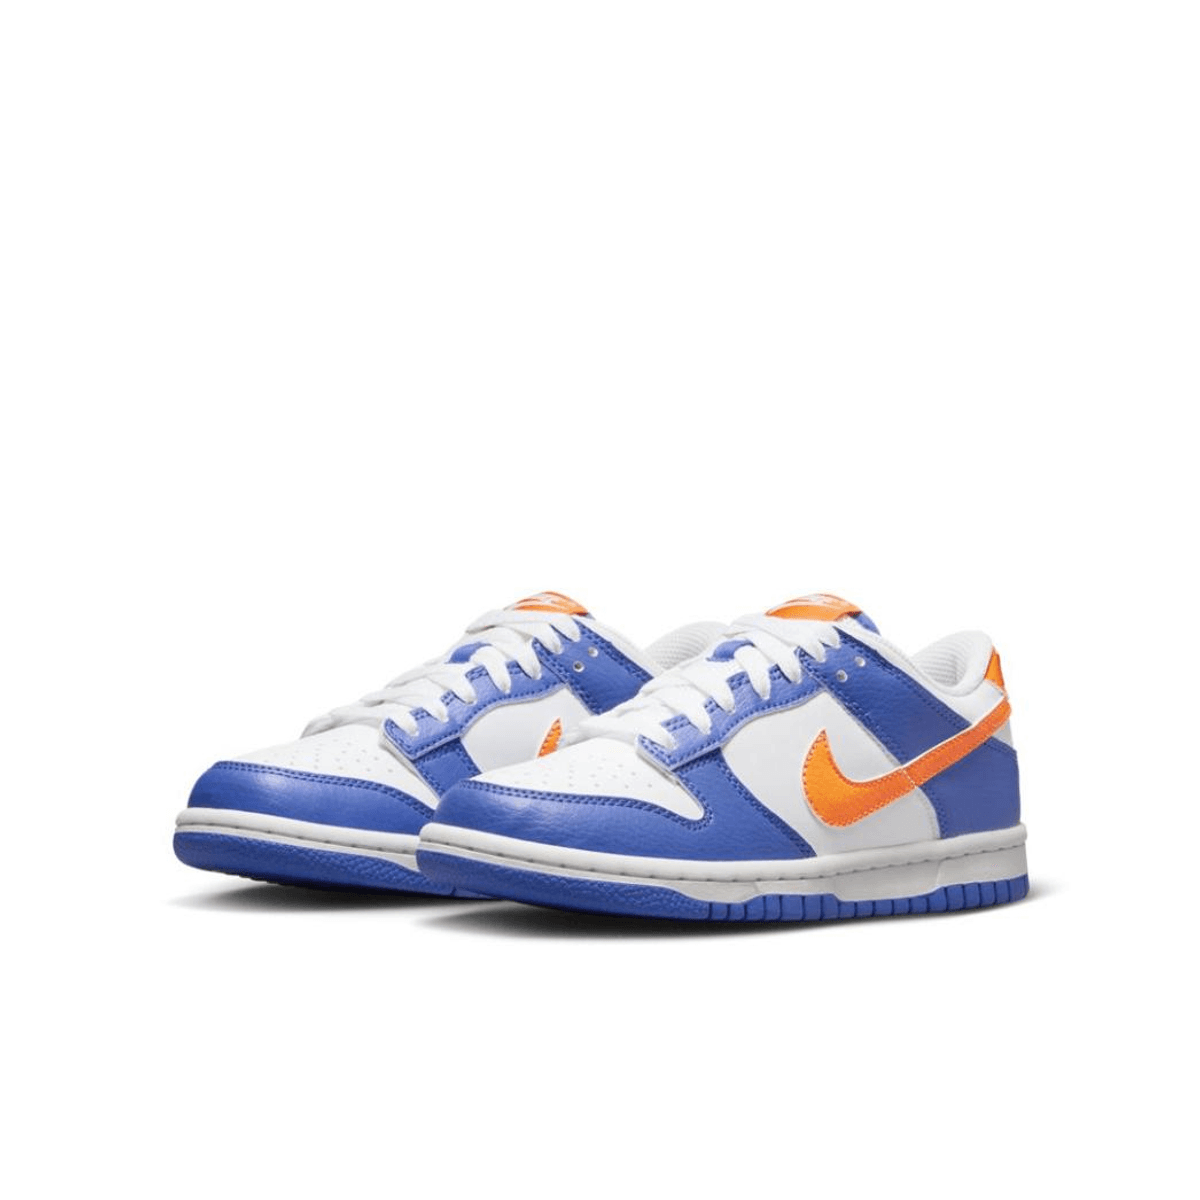 The Nike Dunk Low Knicks Is Exclusively For The Kids